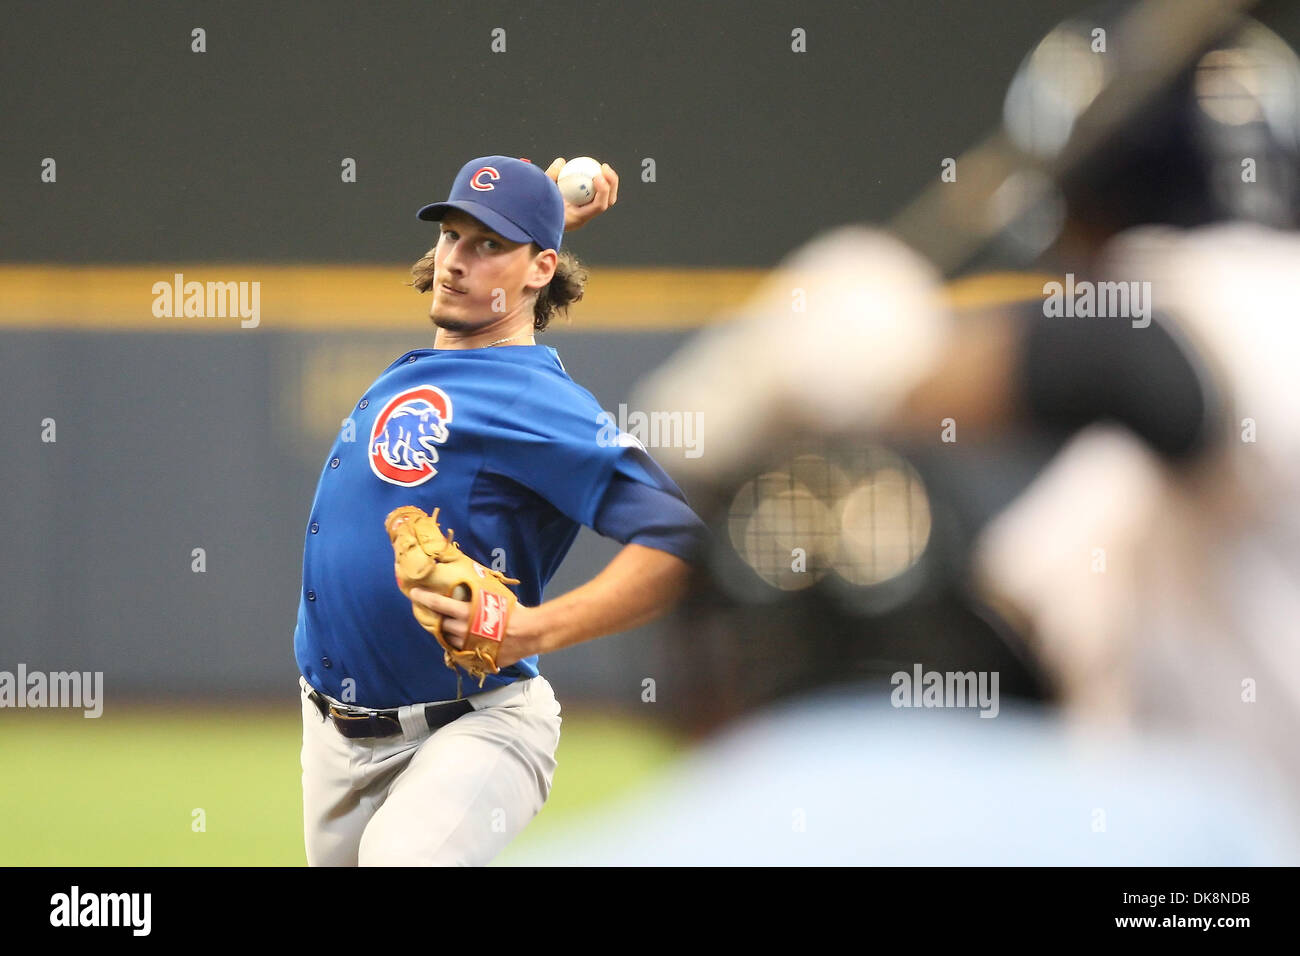 July 28, 2011 - Milwaukee, Wisconsin, U.S - Chicago Cubs relief pitcher Jeff Samardzija #29 delivers a pitch in the game. The Milwaukee Brewers defeated the Chicago Cubs 4-2 at Miller Park in Milwaukee. (Credit Image: © John Fisher/Southcreek Global/ZUMAPRESS.com) Stock Photo